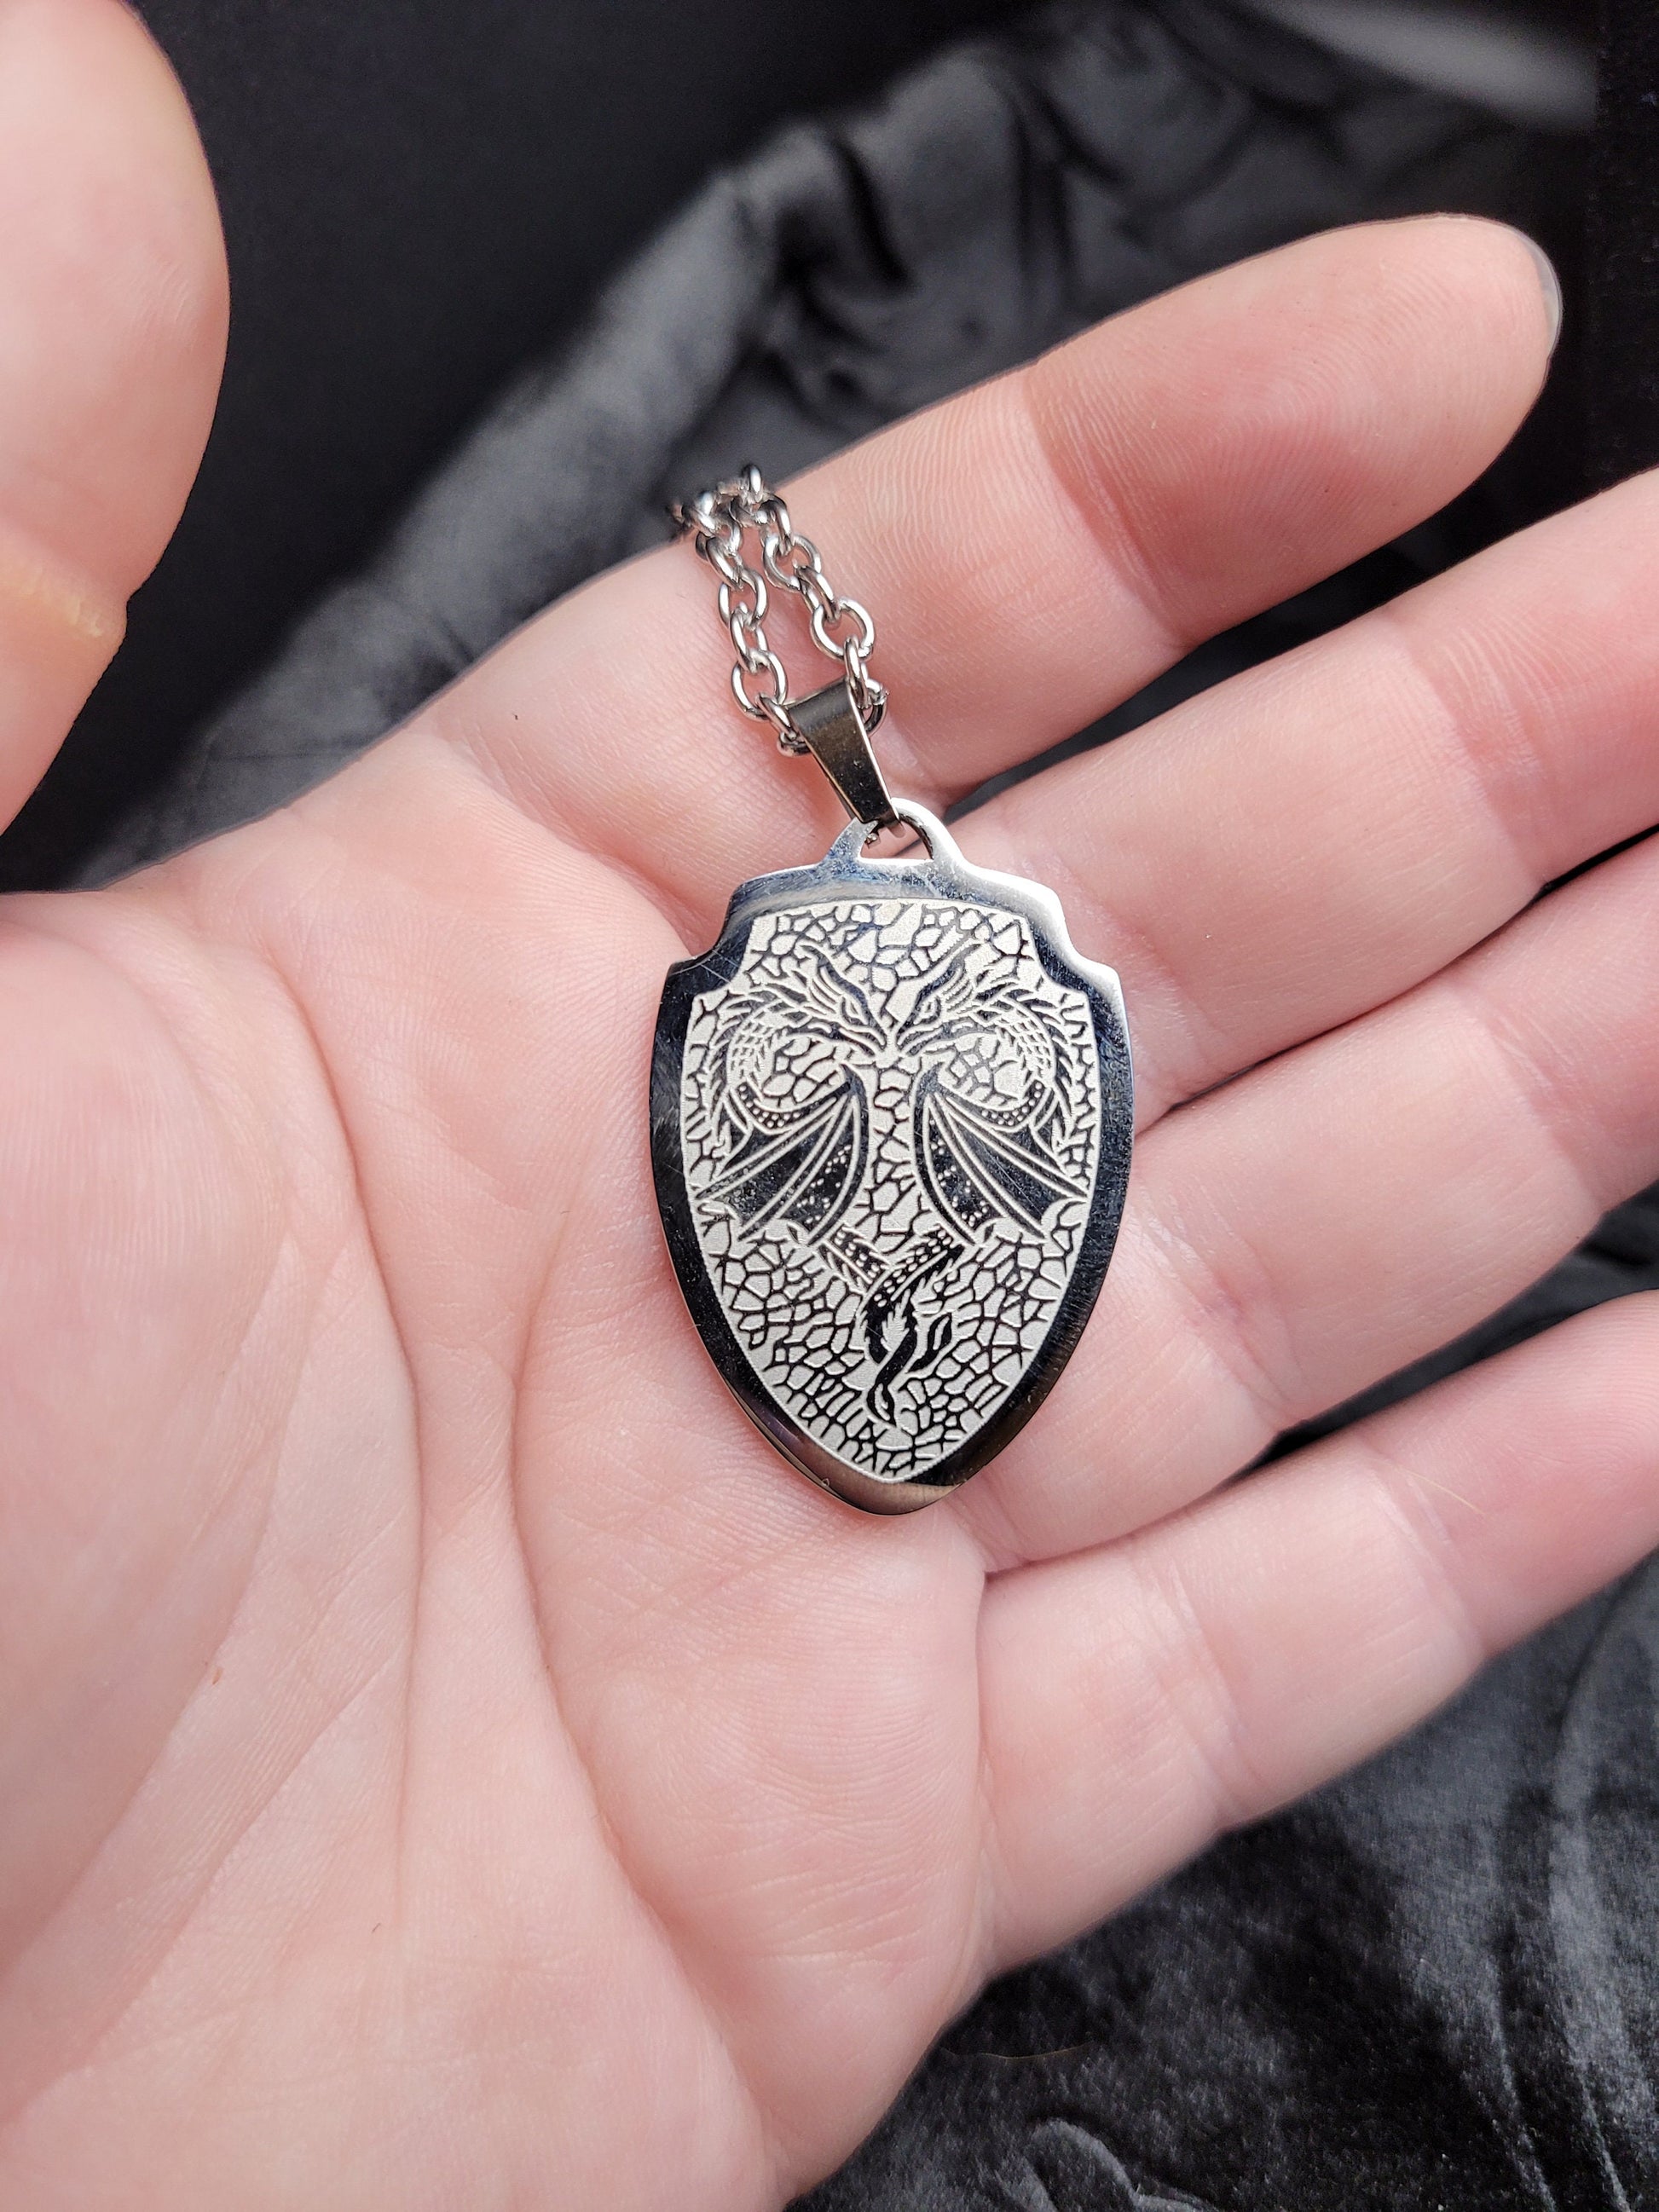 Stainless Steel Fantasy DND RPG Dragon Shield Necklace (multiple styles)